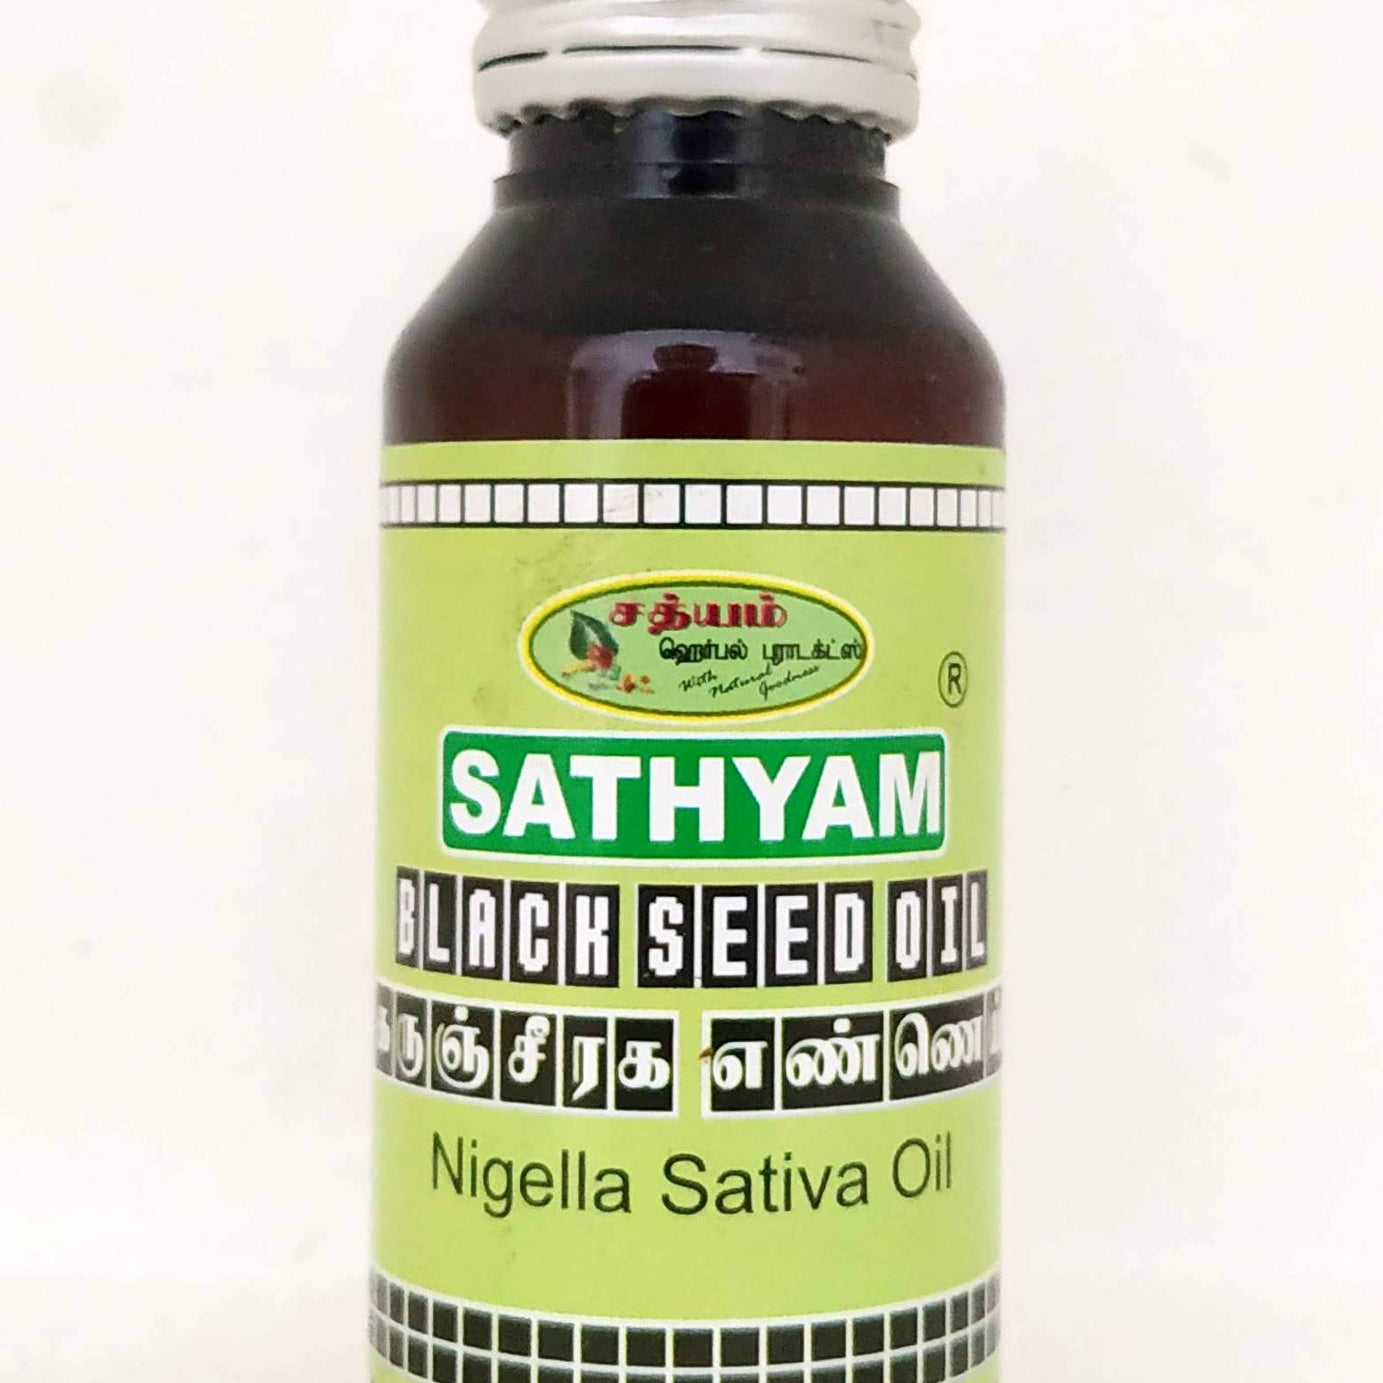 Shop Black seed oil 60ml at price 150.00 from Sathyam Herbals Online - Ayush Care